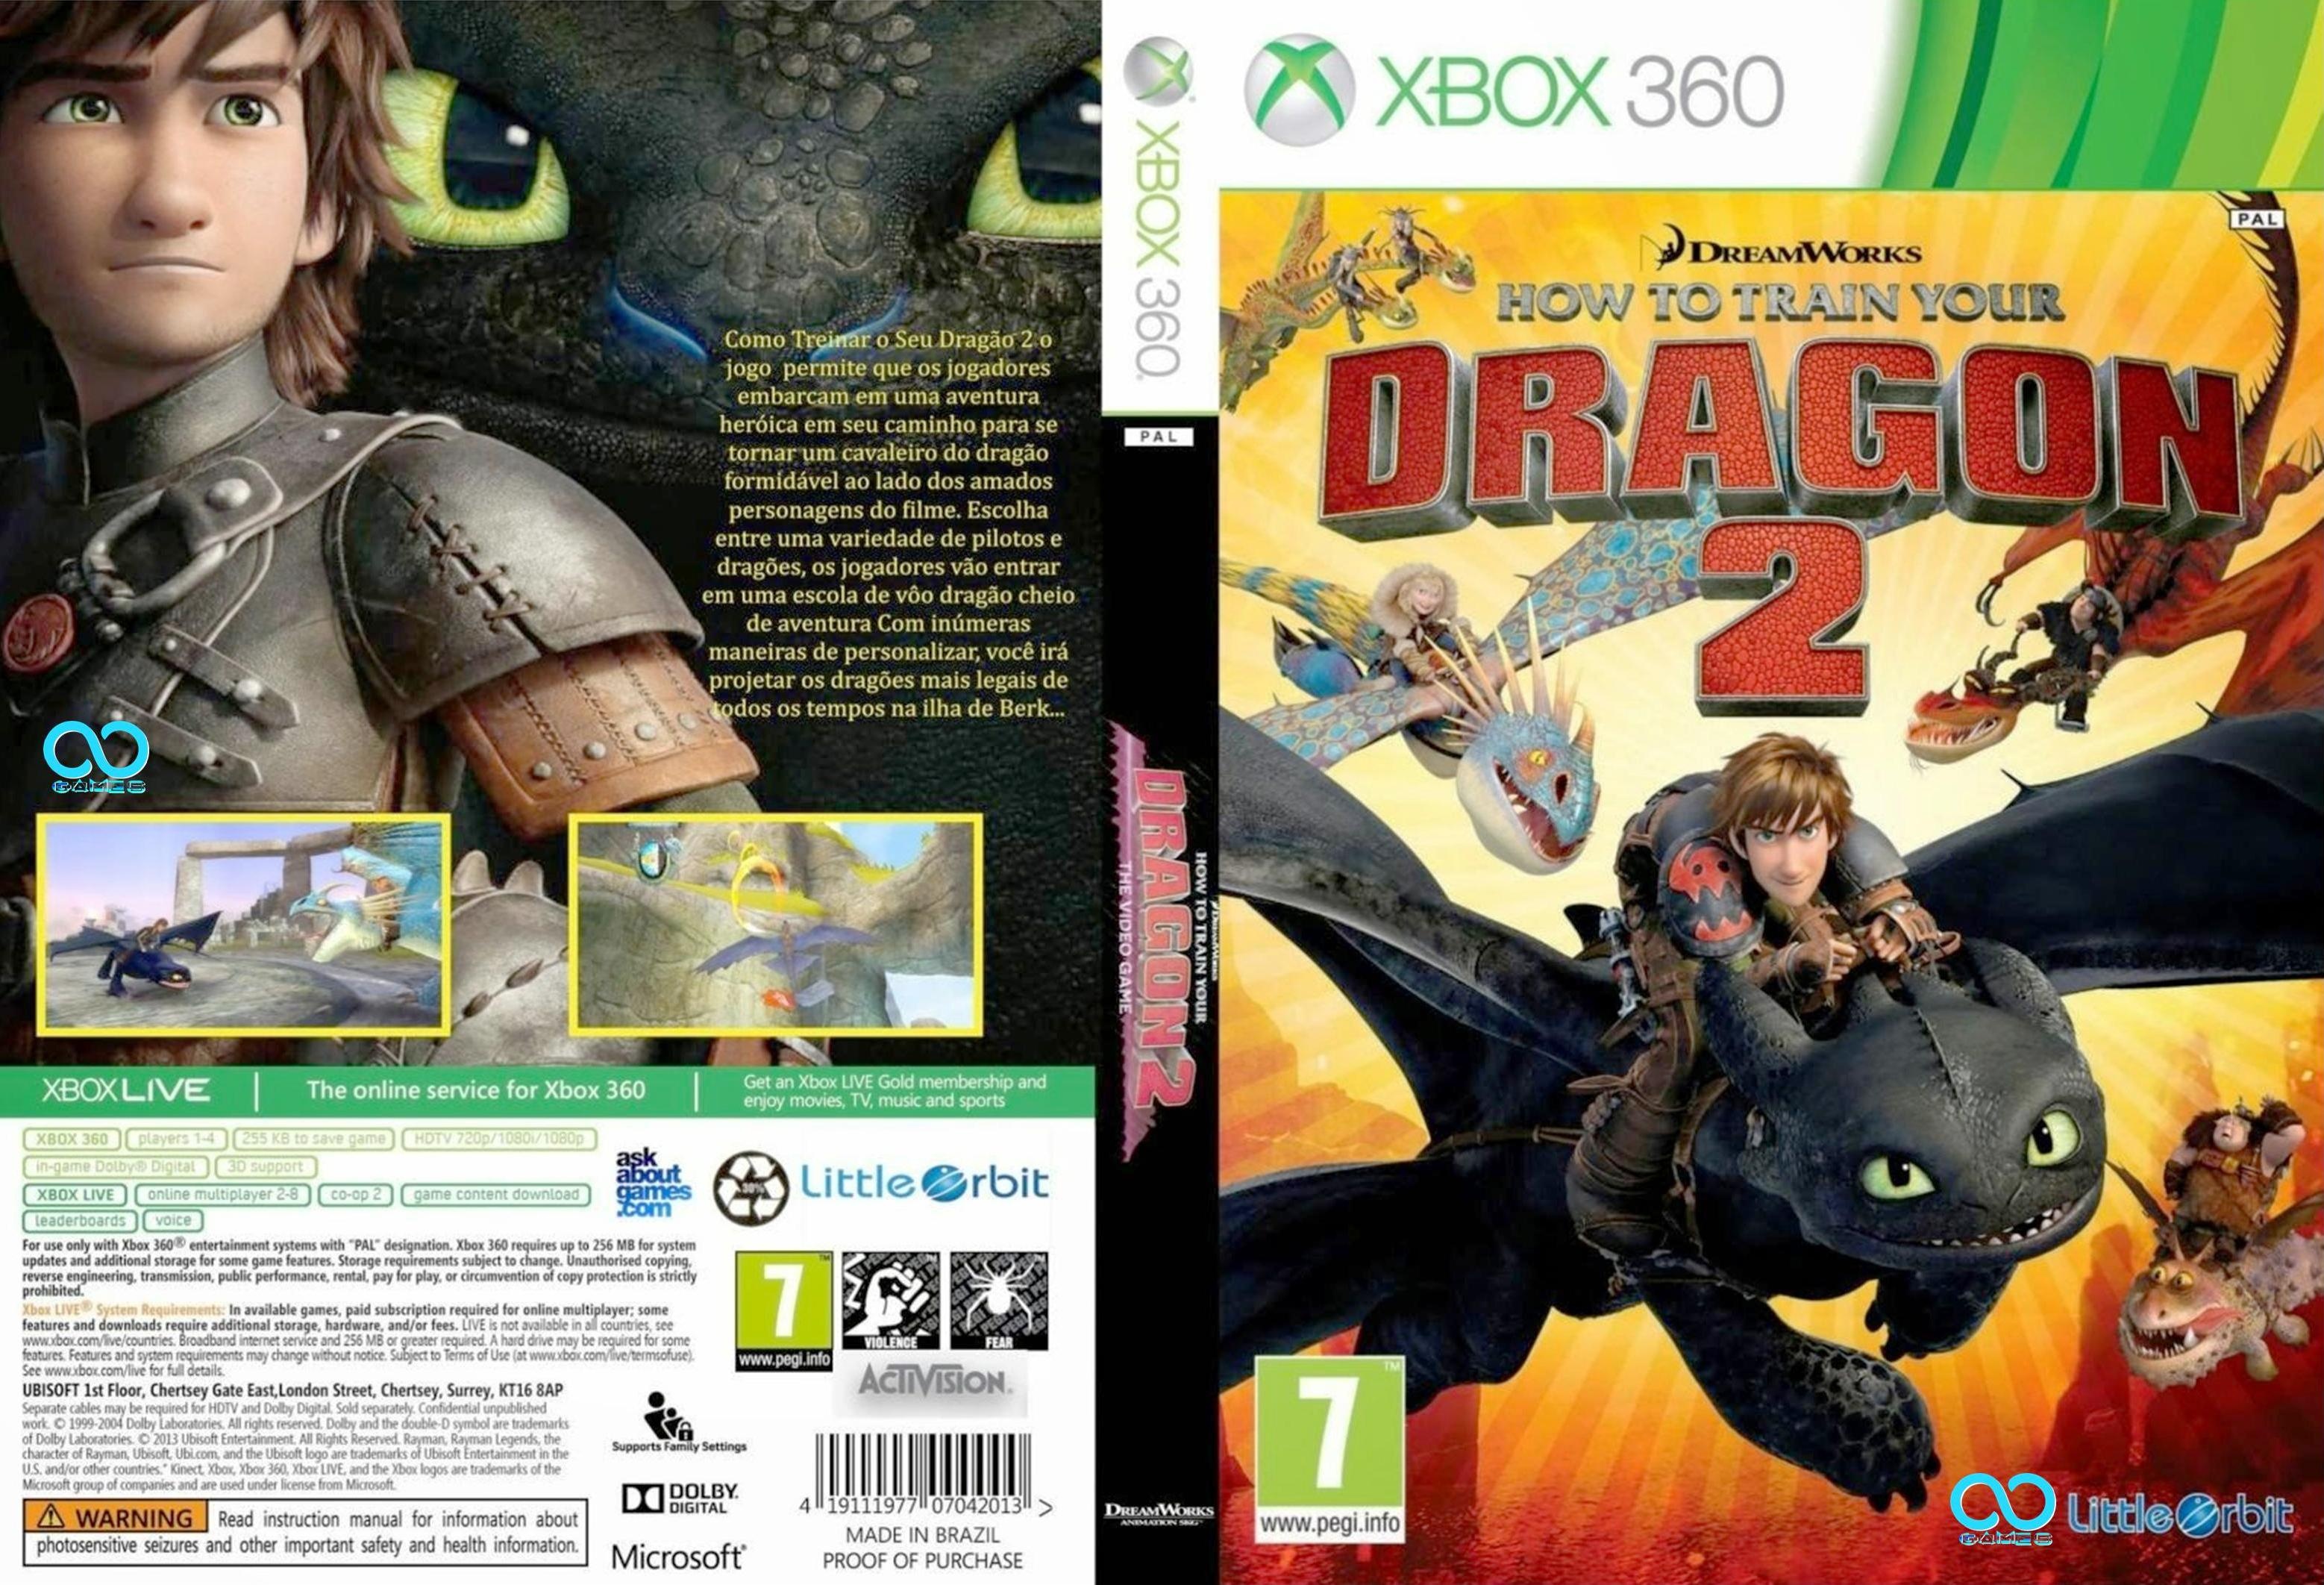 How To Train Your Dragon 2 box cover